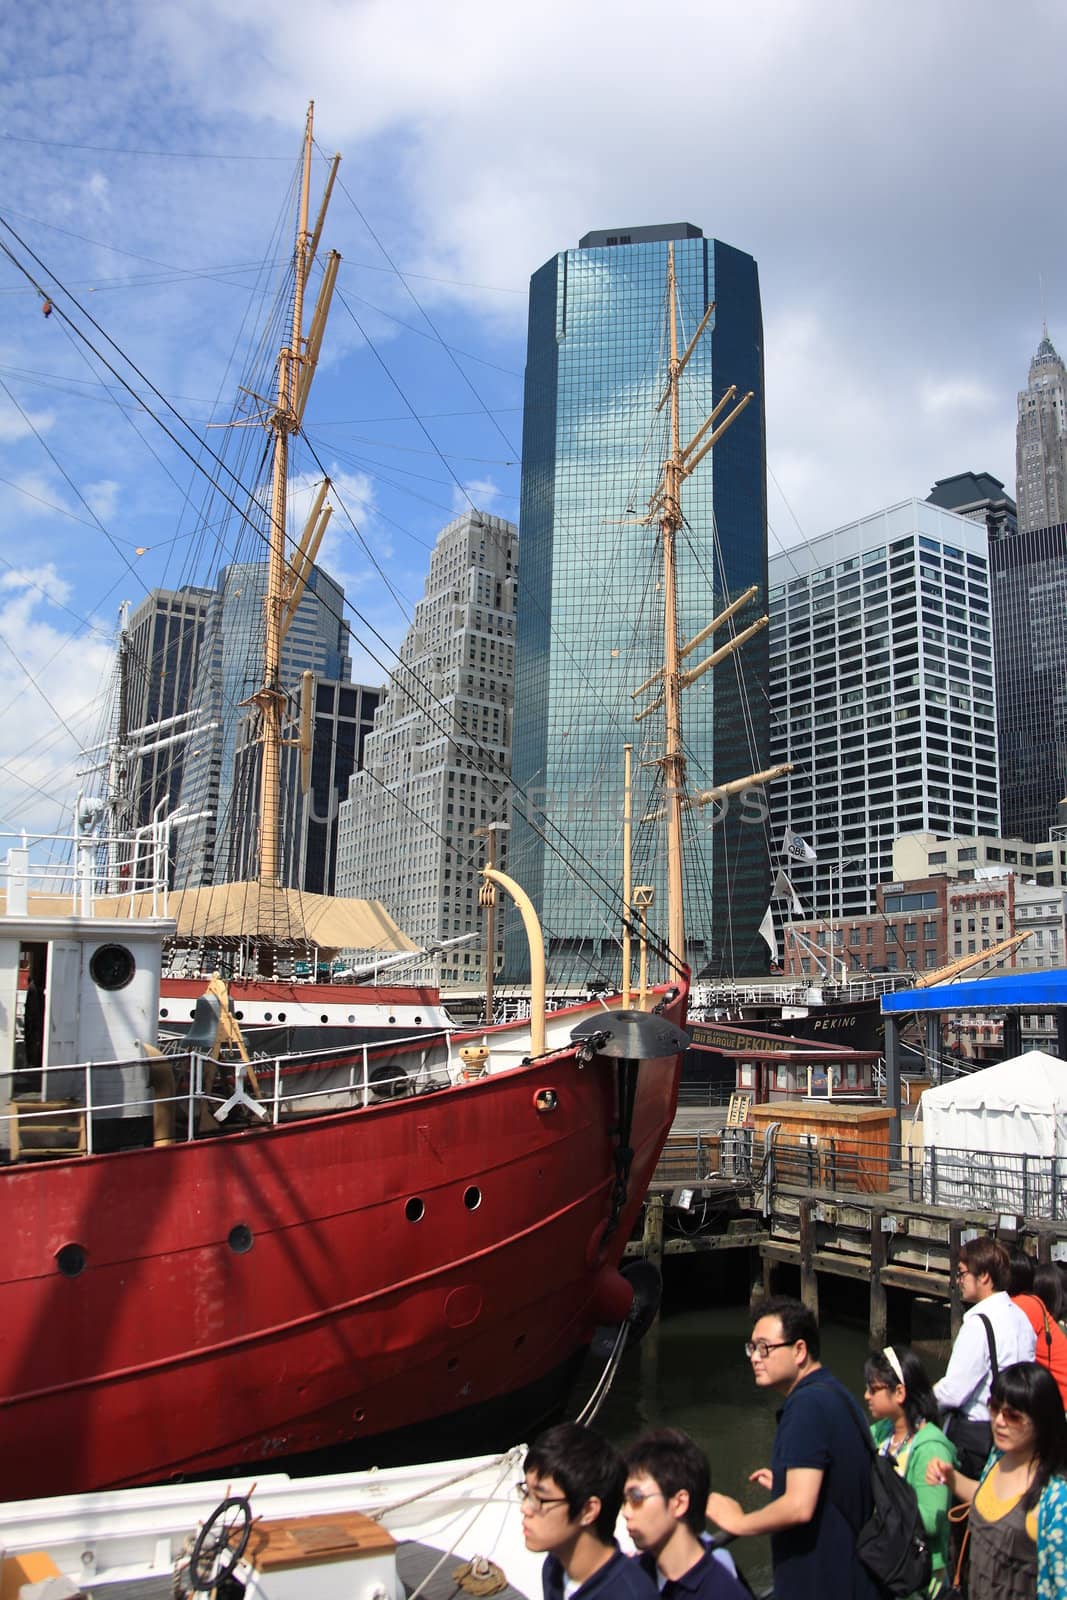 South Street Seaport by Ffooter